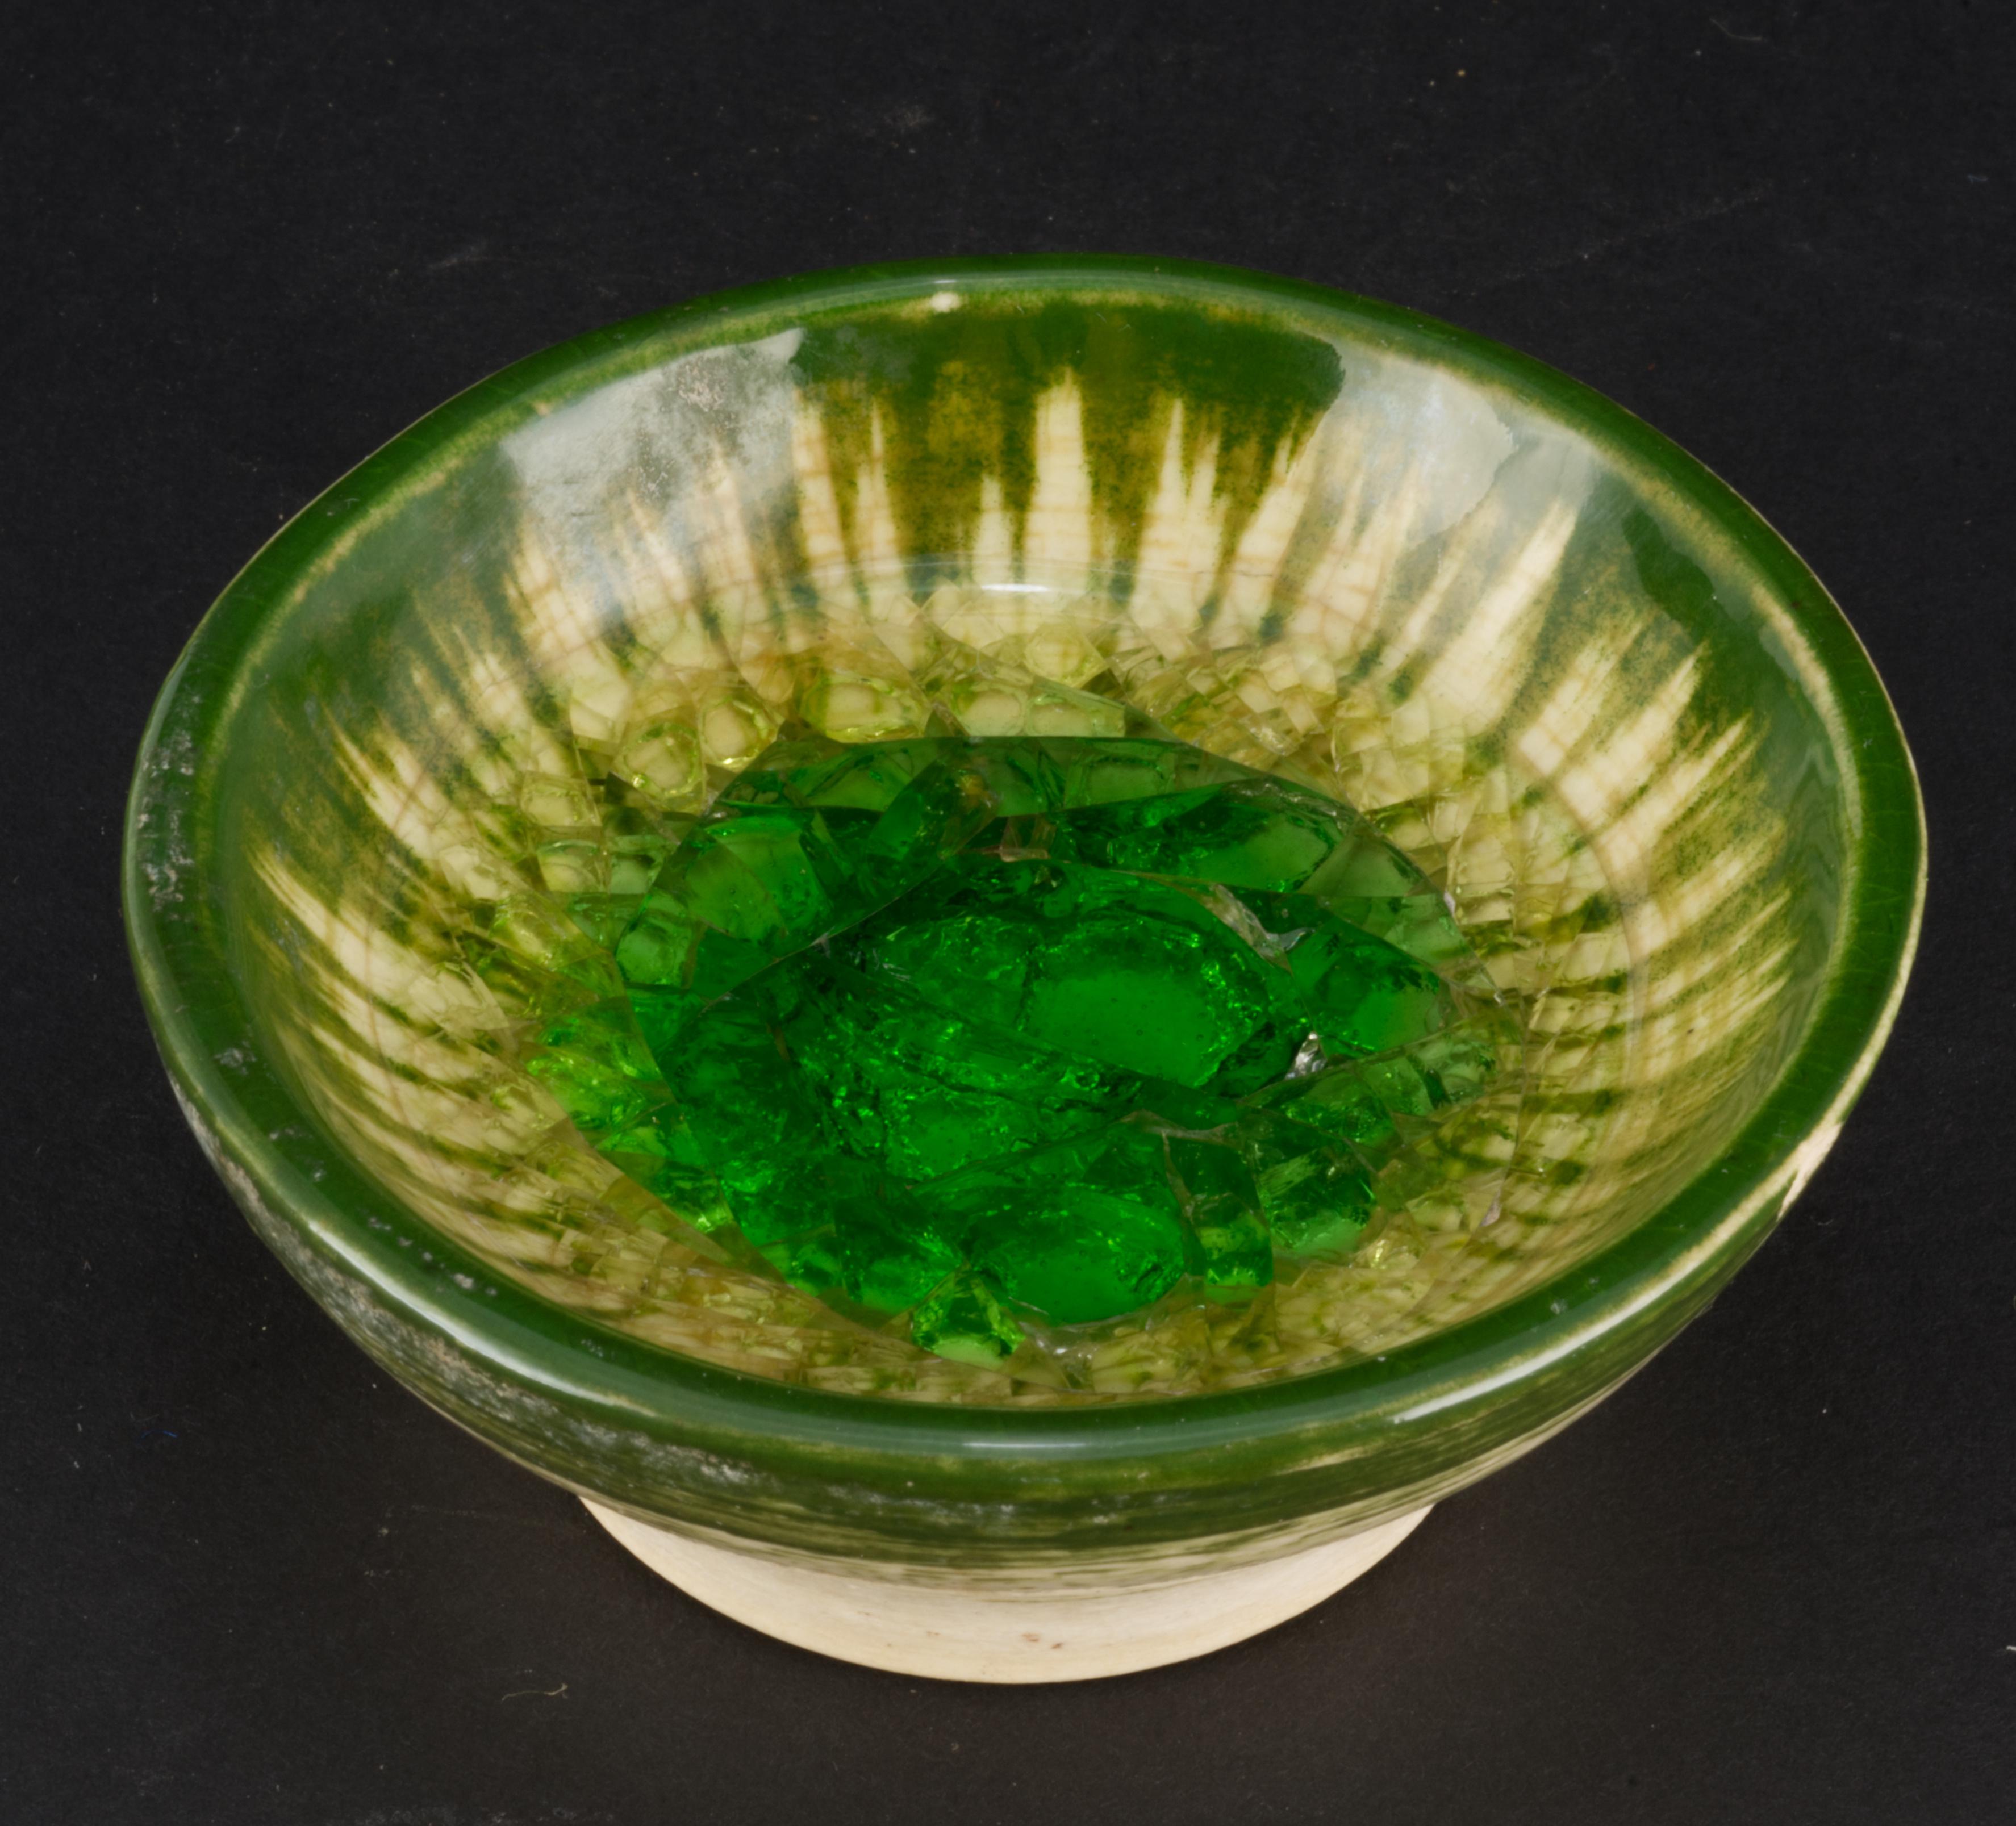 Art Deco Waylande Gregory for Dunhill Fused Glass Ceramic Bowl Signed, 1940s Ashtray For Sale